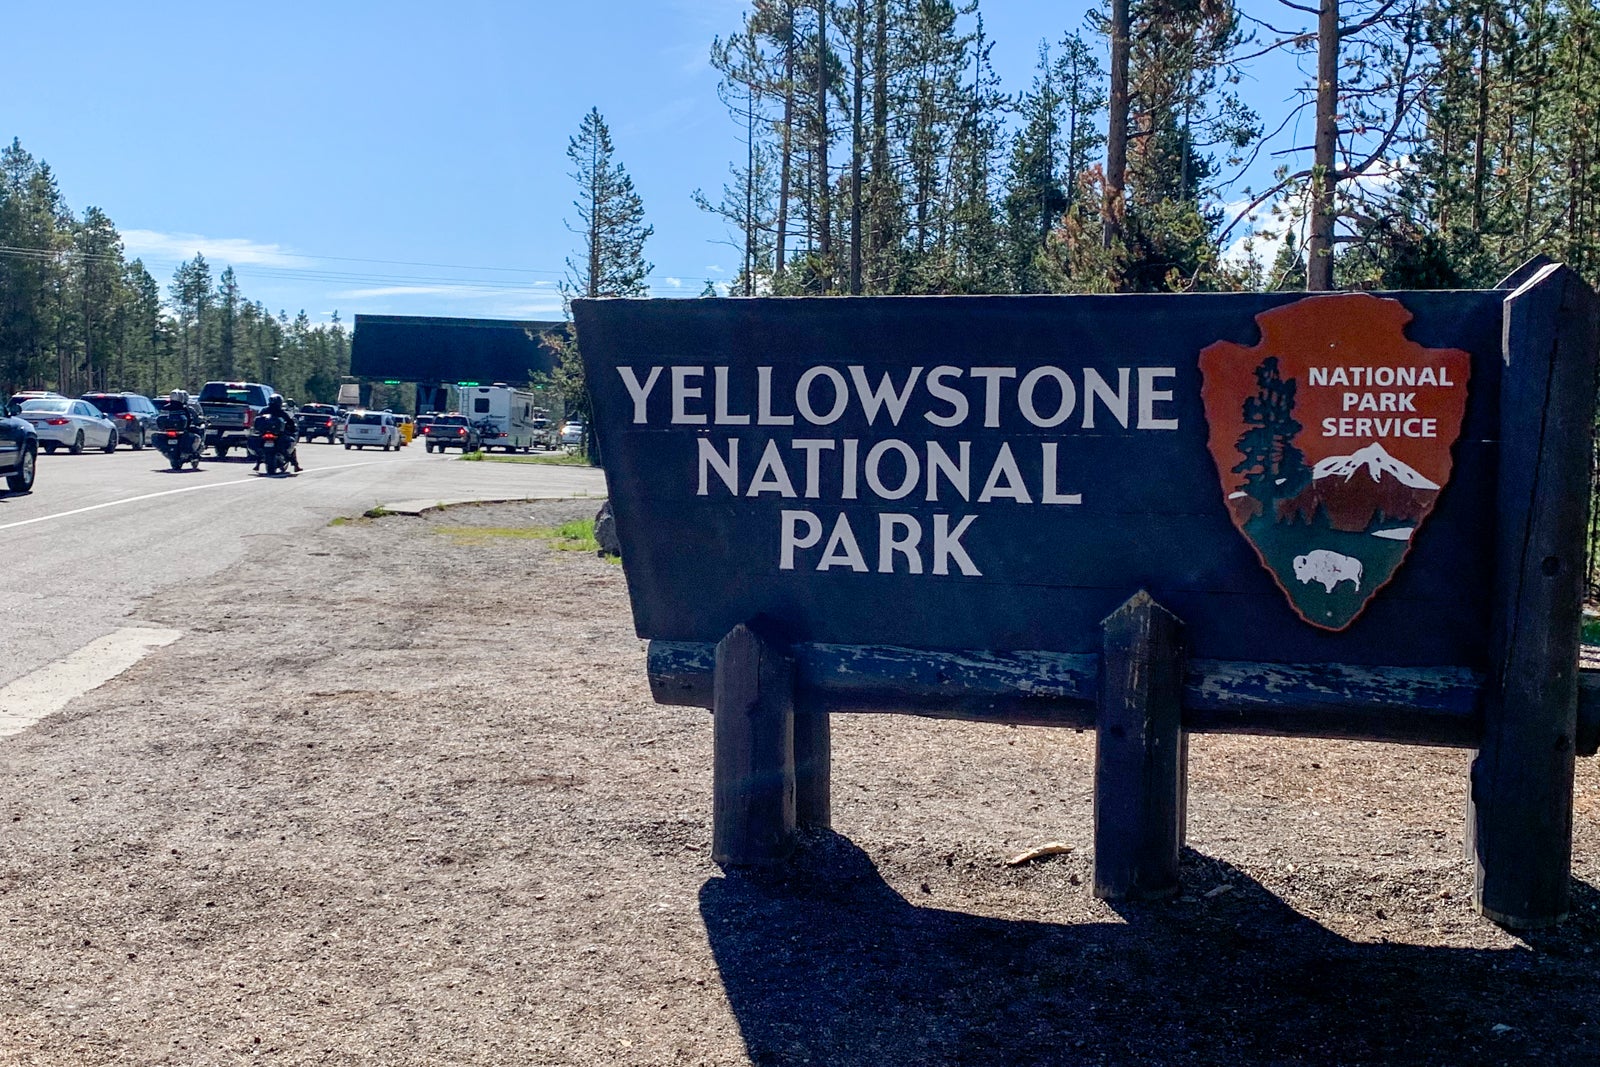 planning trip to yellowstone